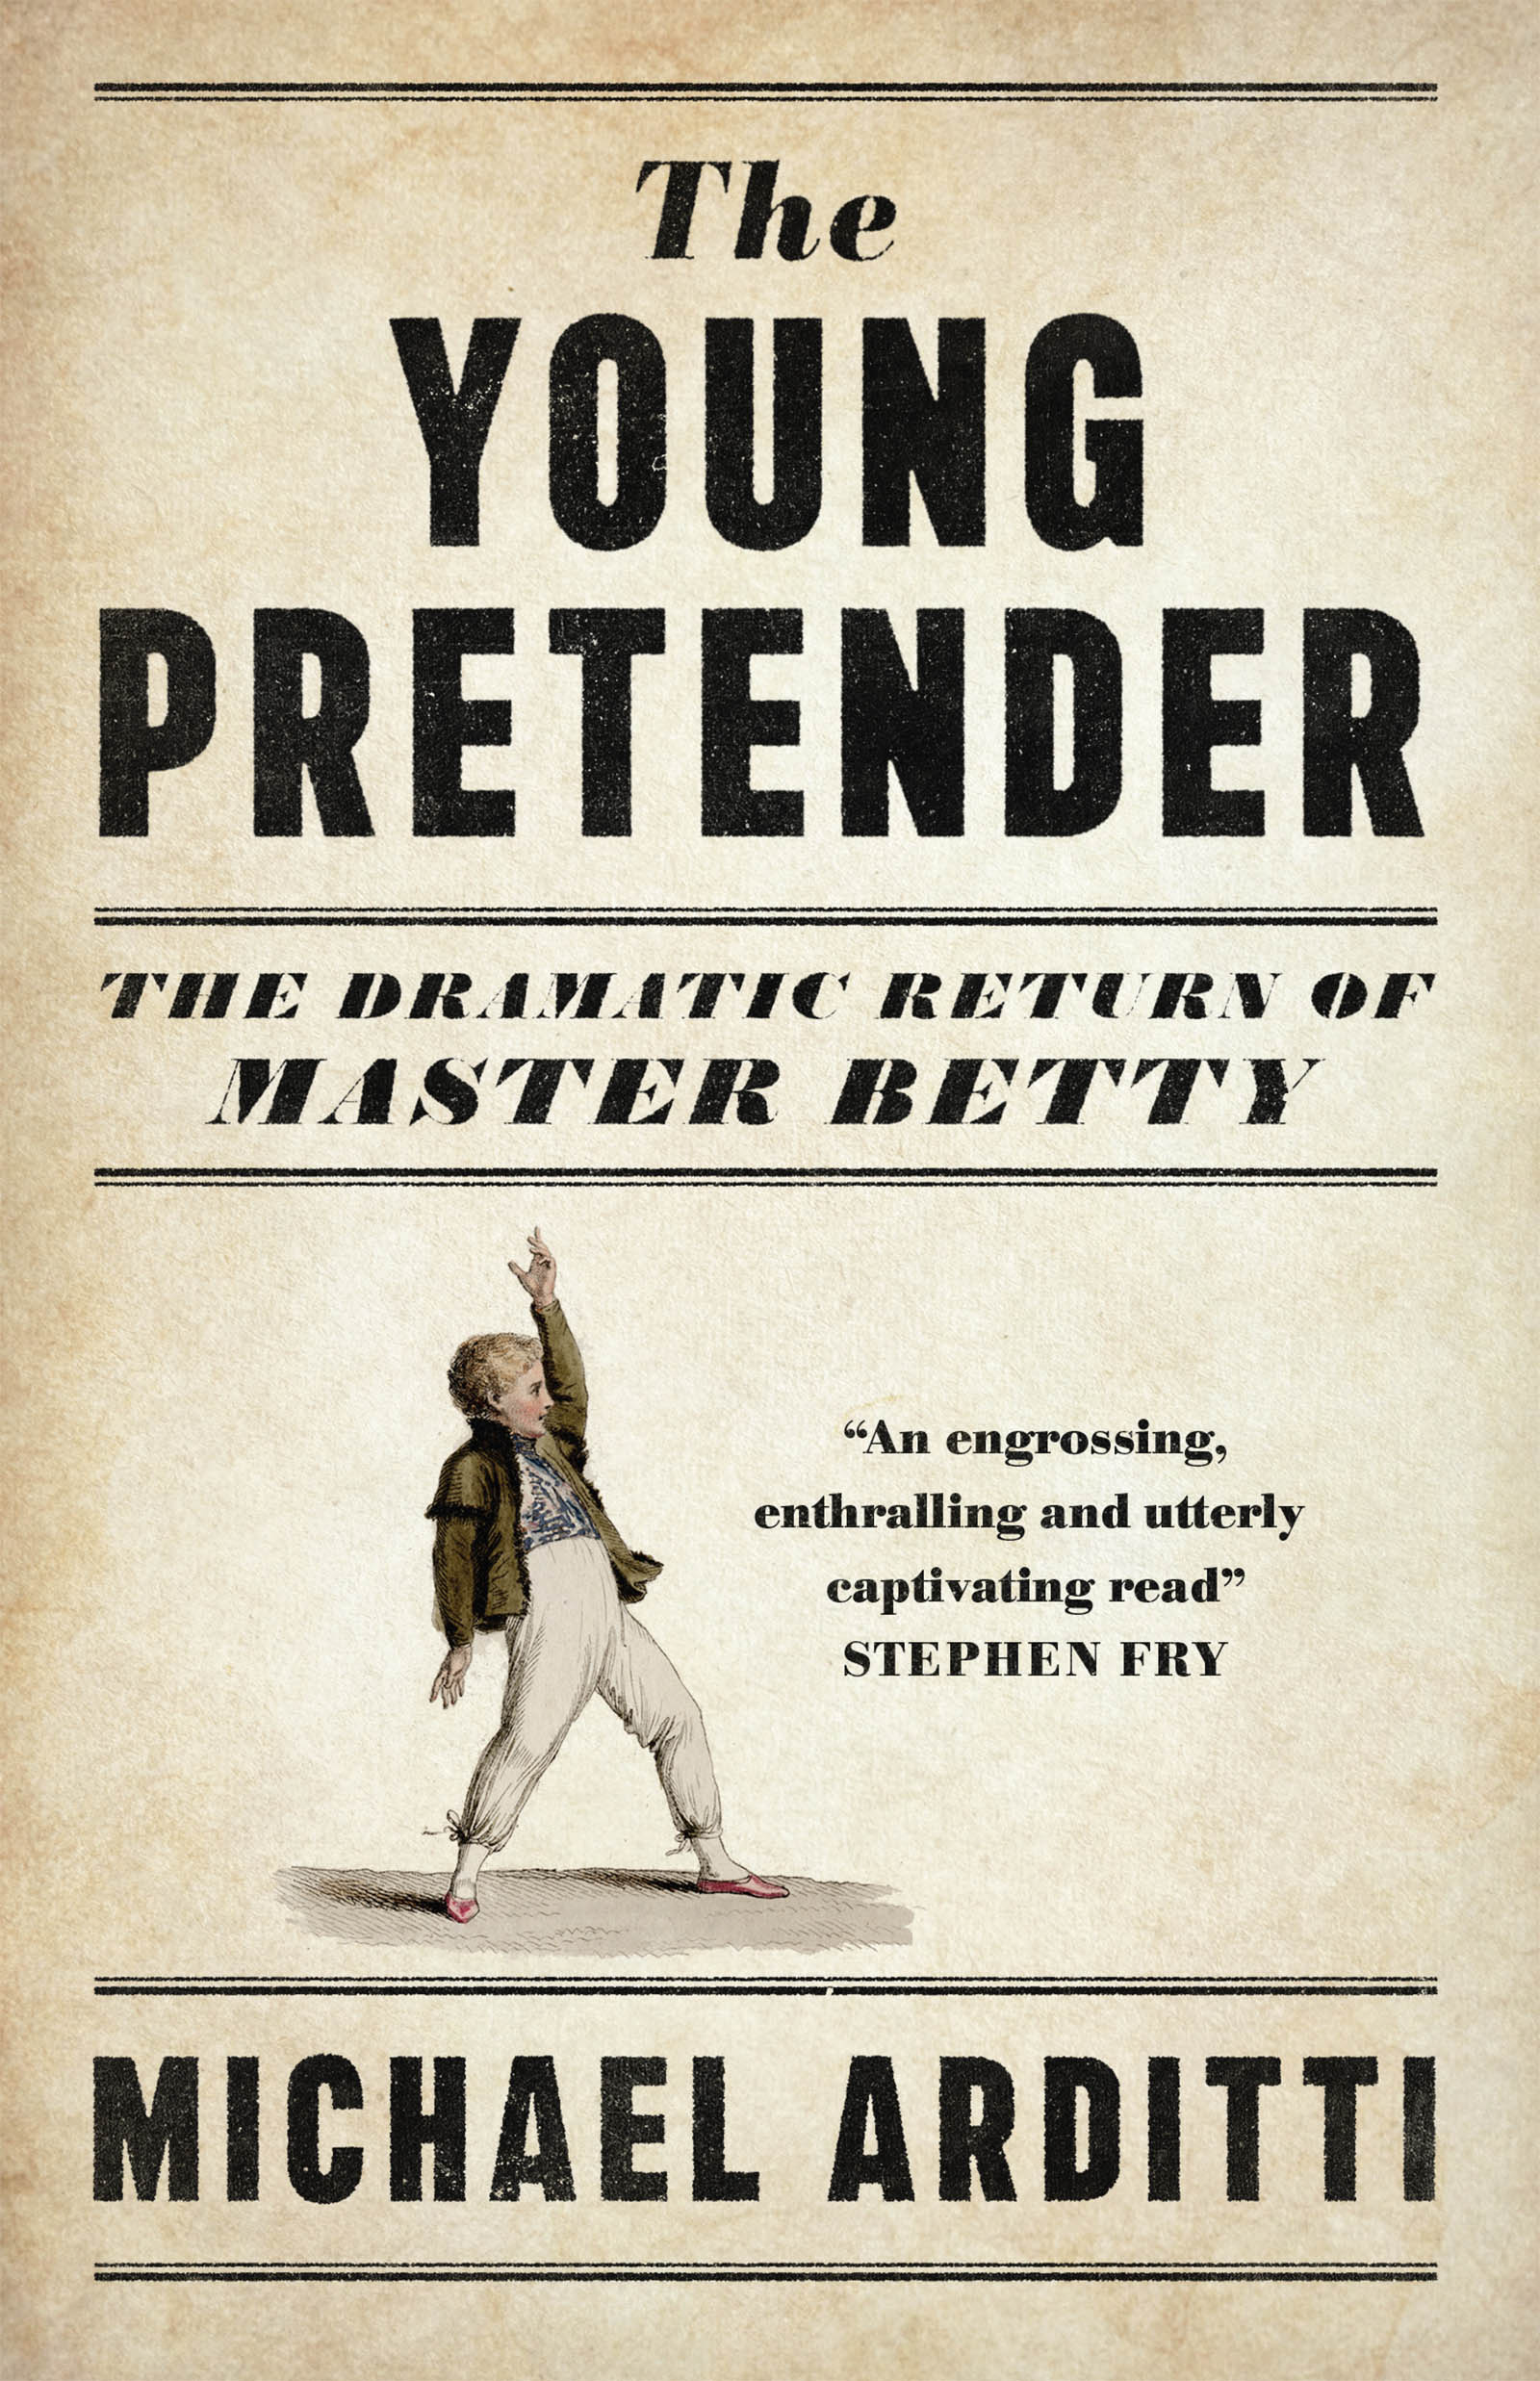 The Young Pretender